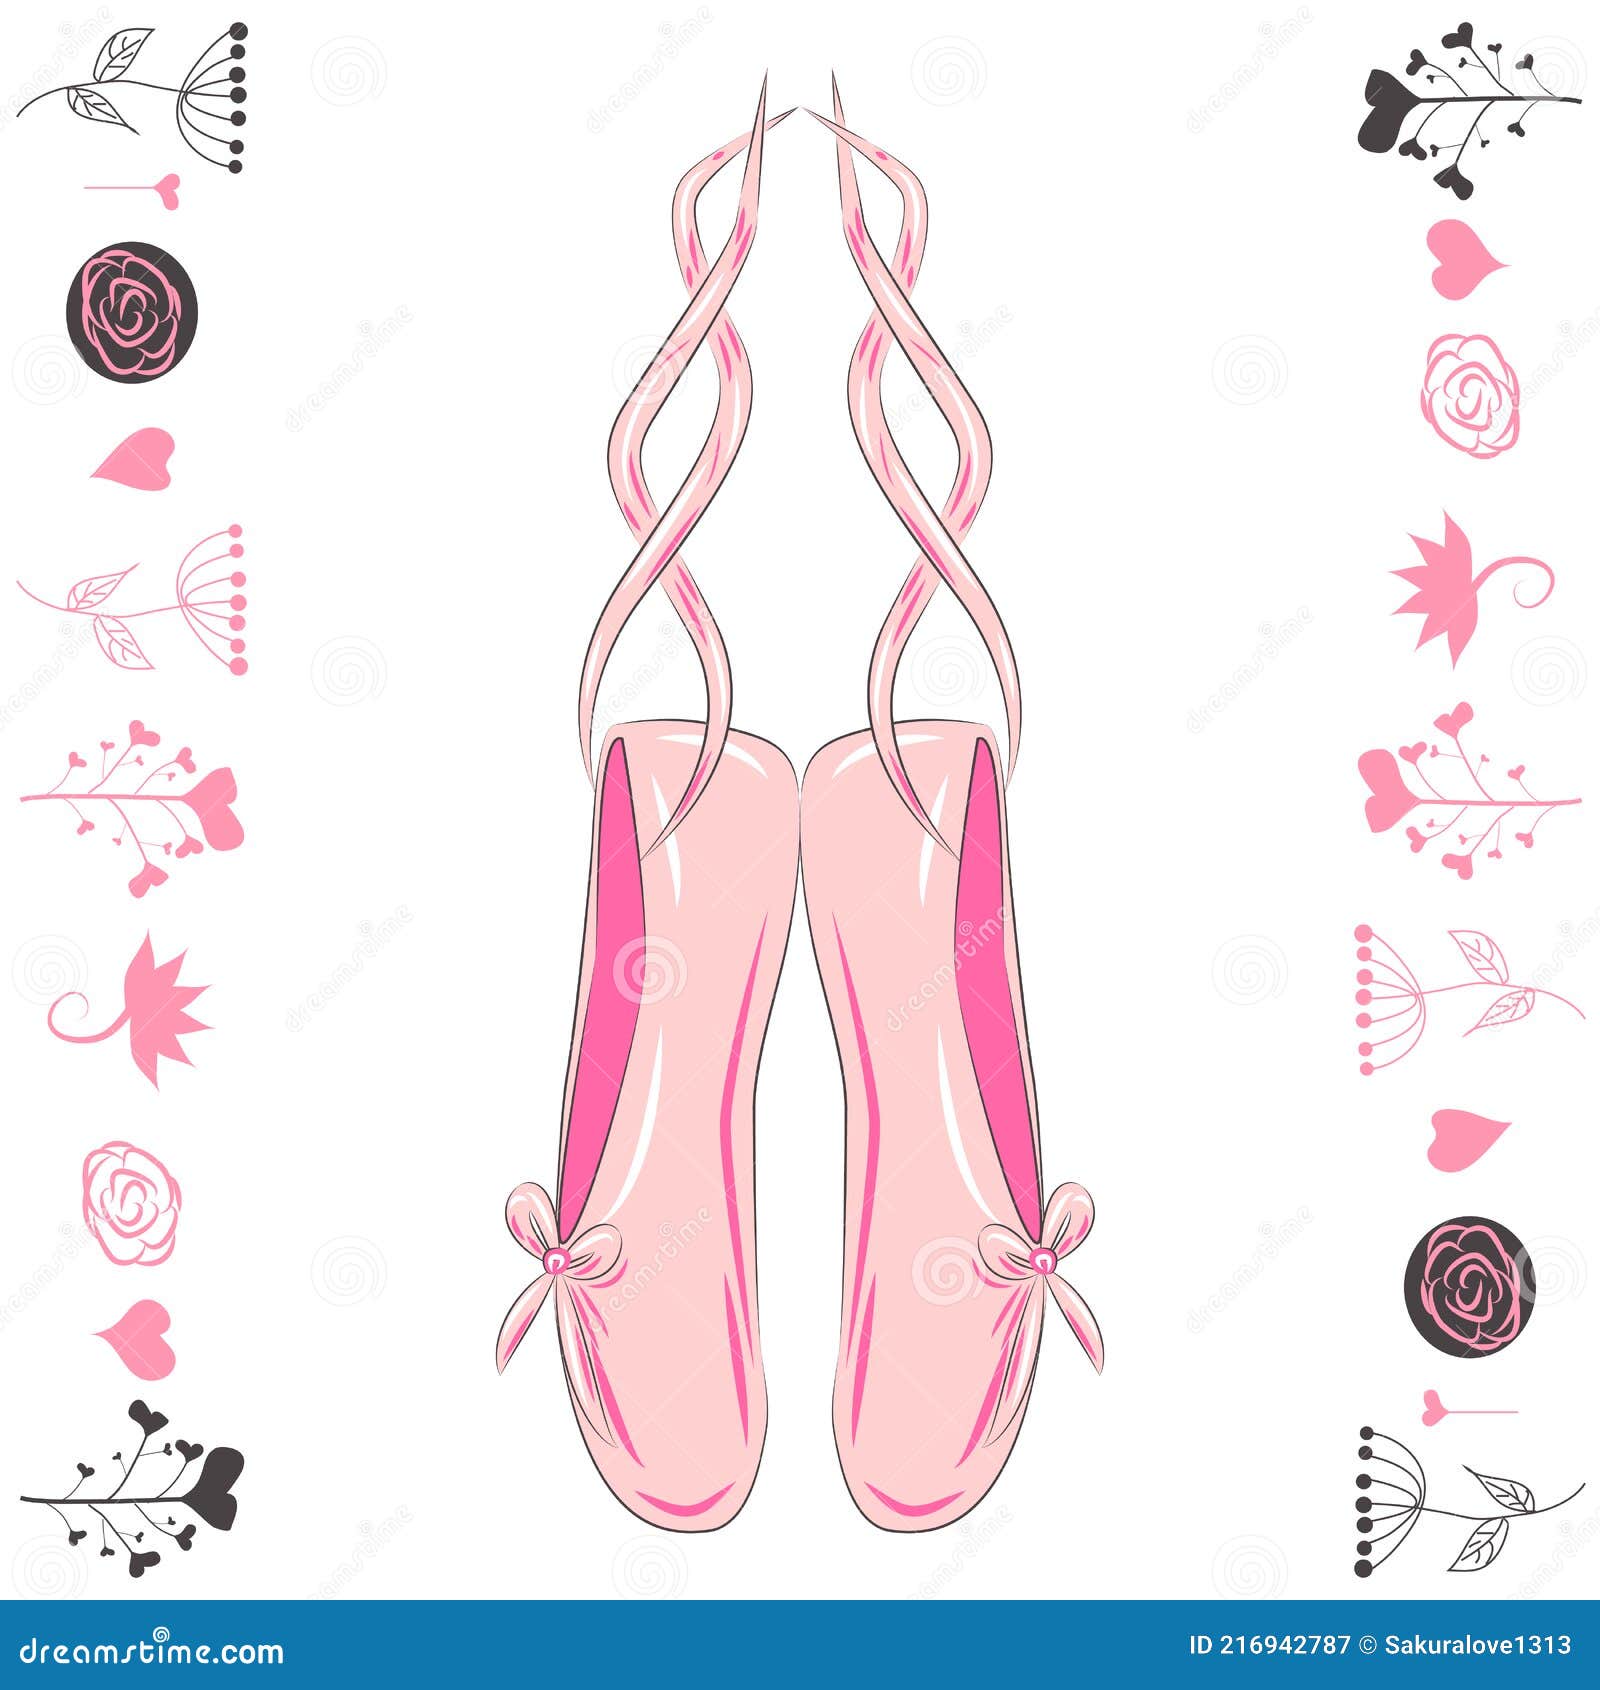 Hanging Pink Ballet Shoes Illustration Made in Outline Style Stock ...